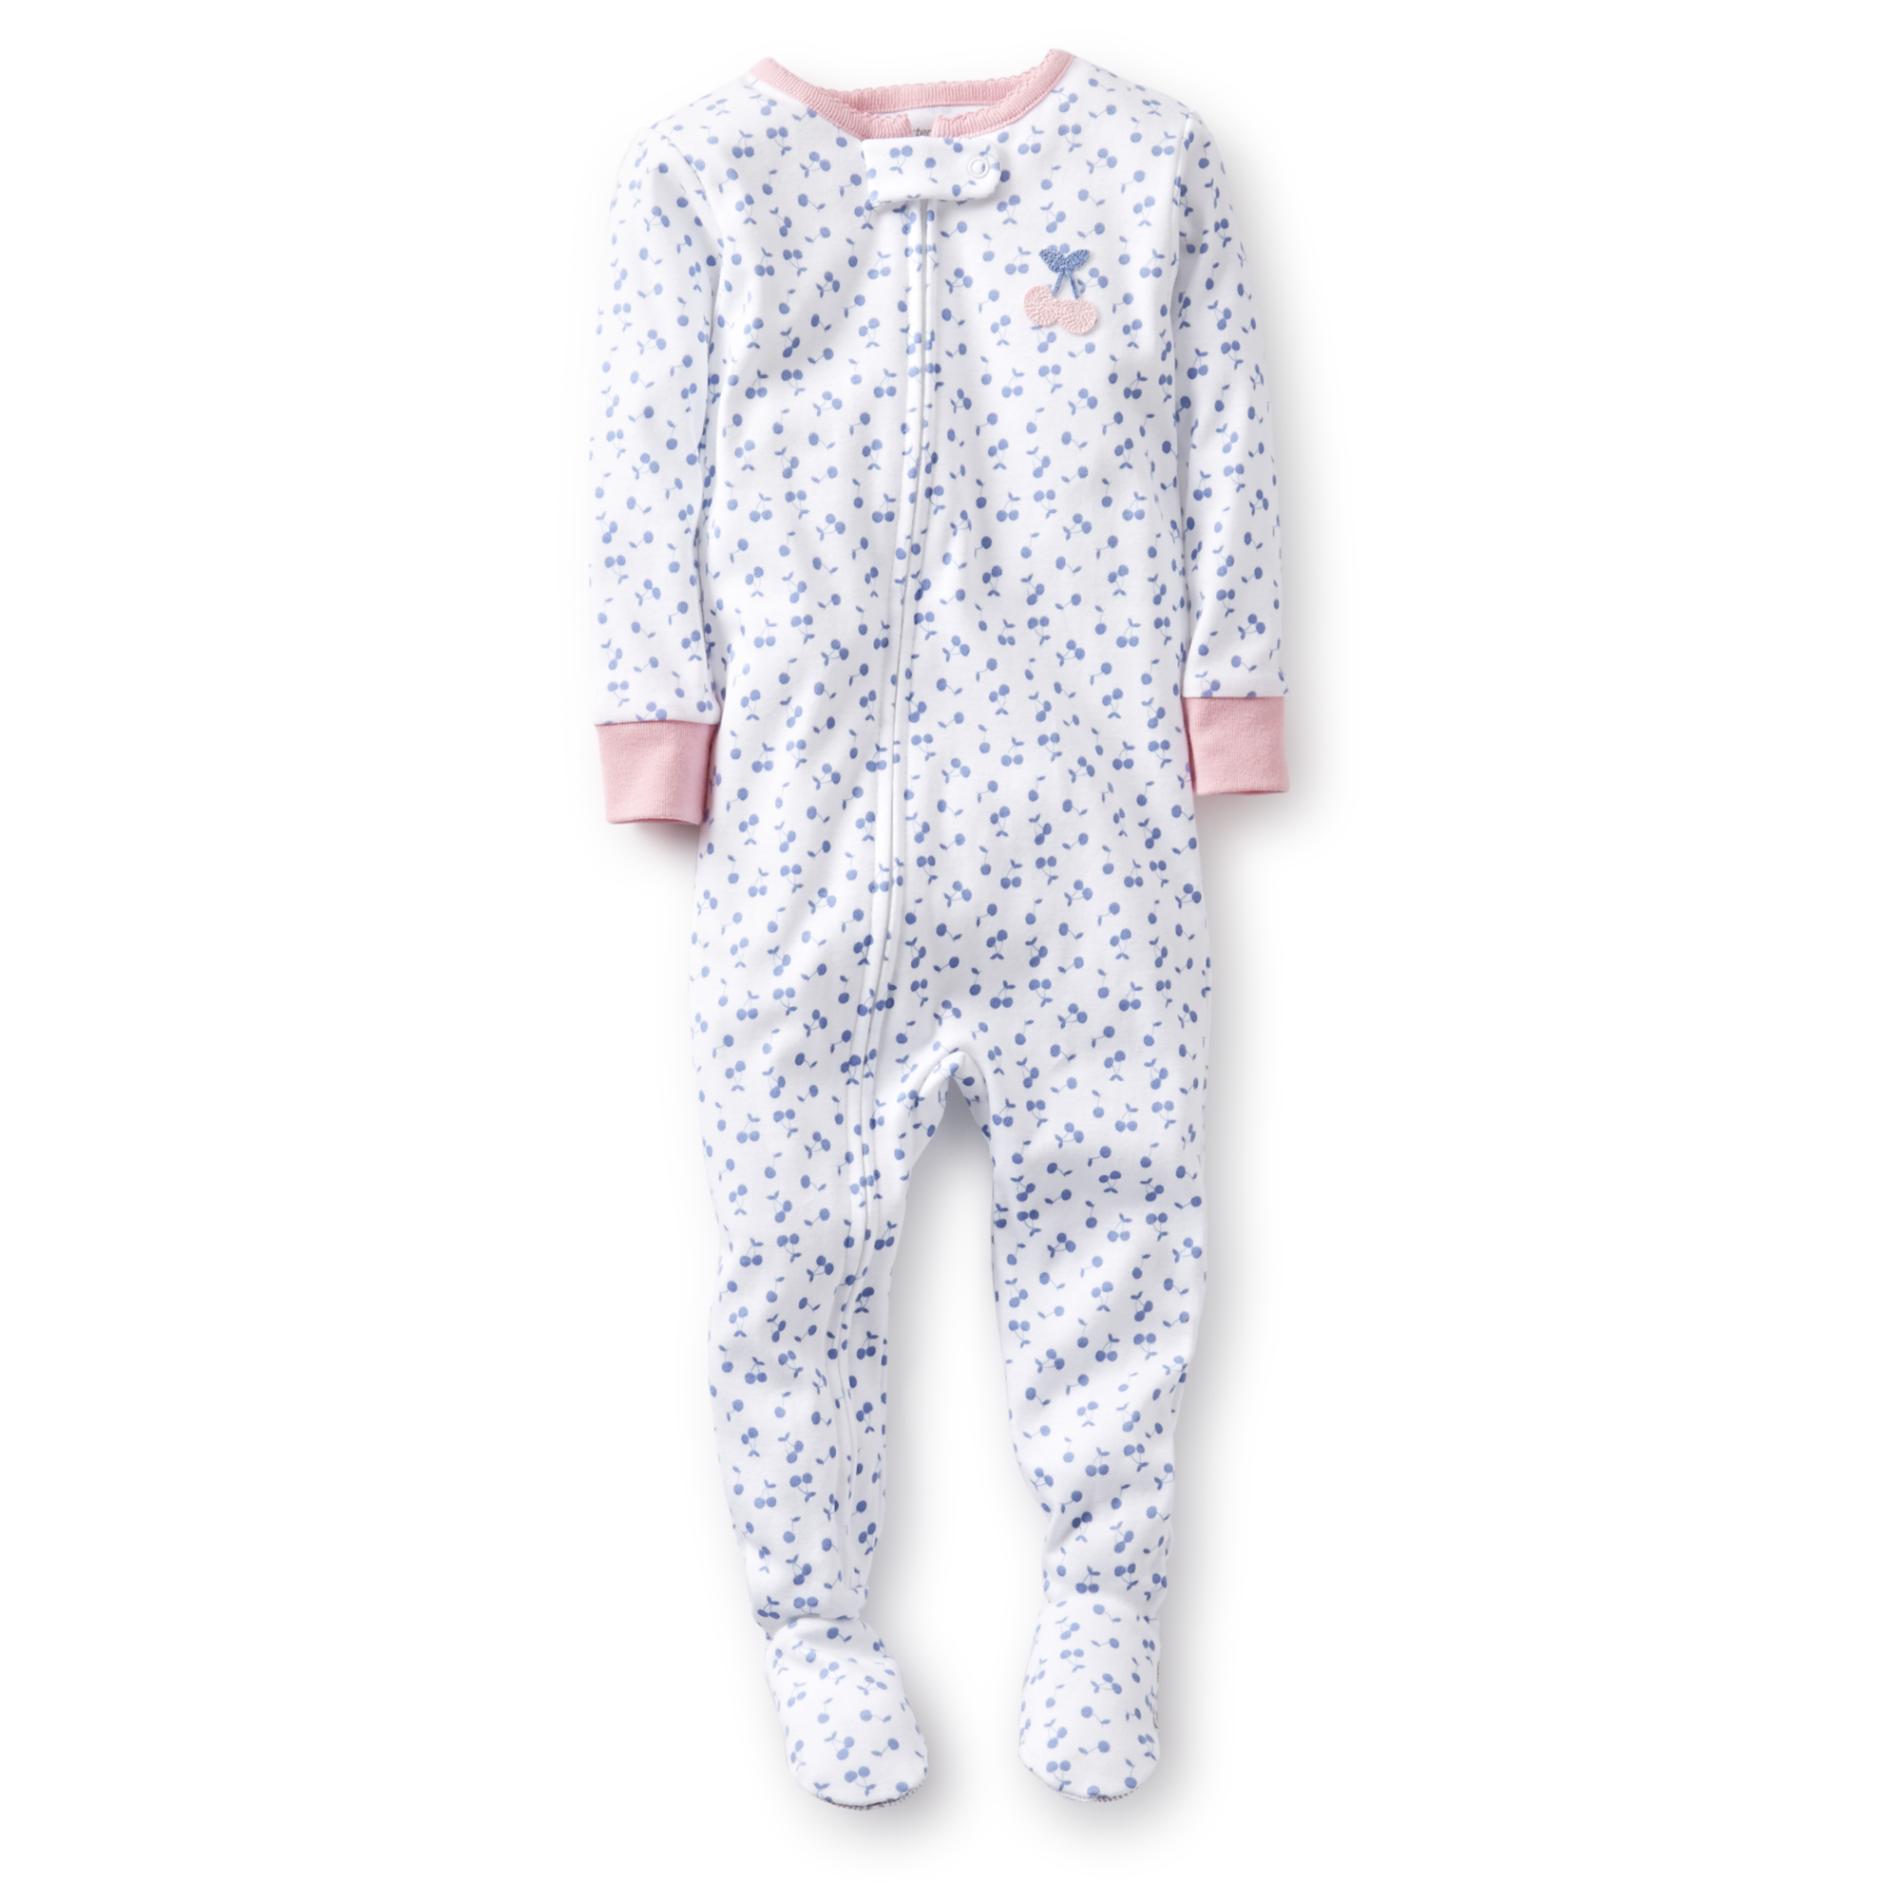 Carter's Infant Girl's Footed Pajama - Cherry